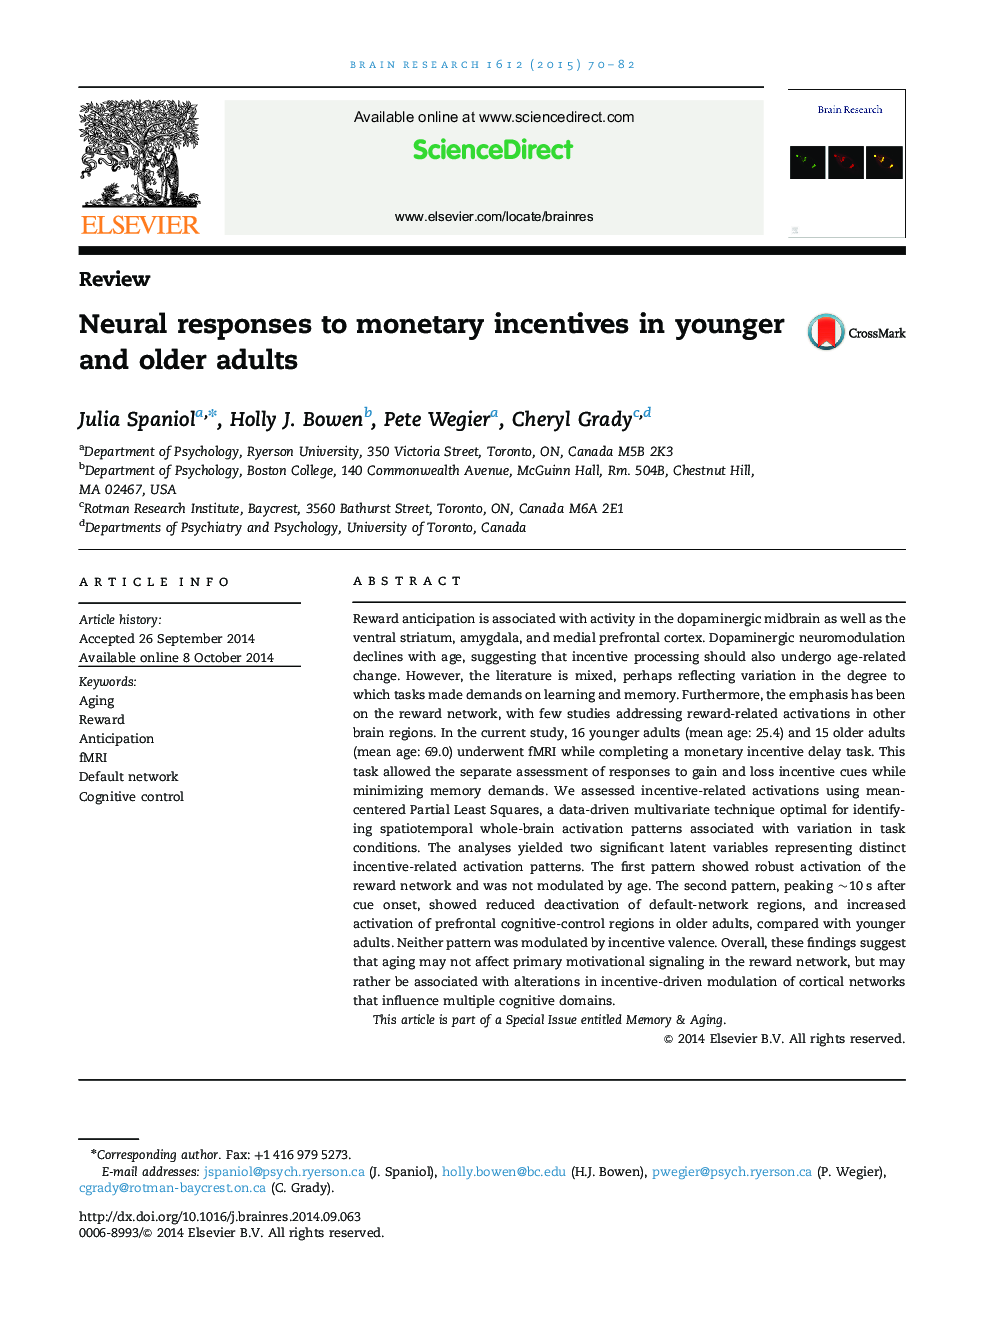 ReviewNeural responses to monetary incentives in younger and older adults